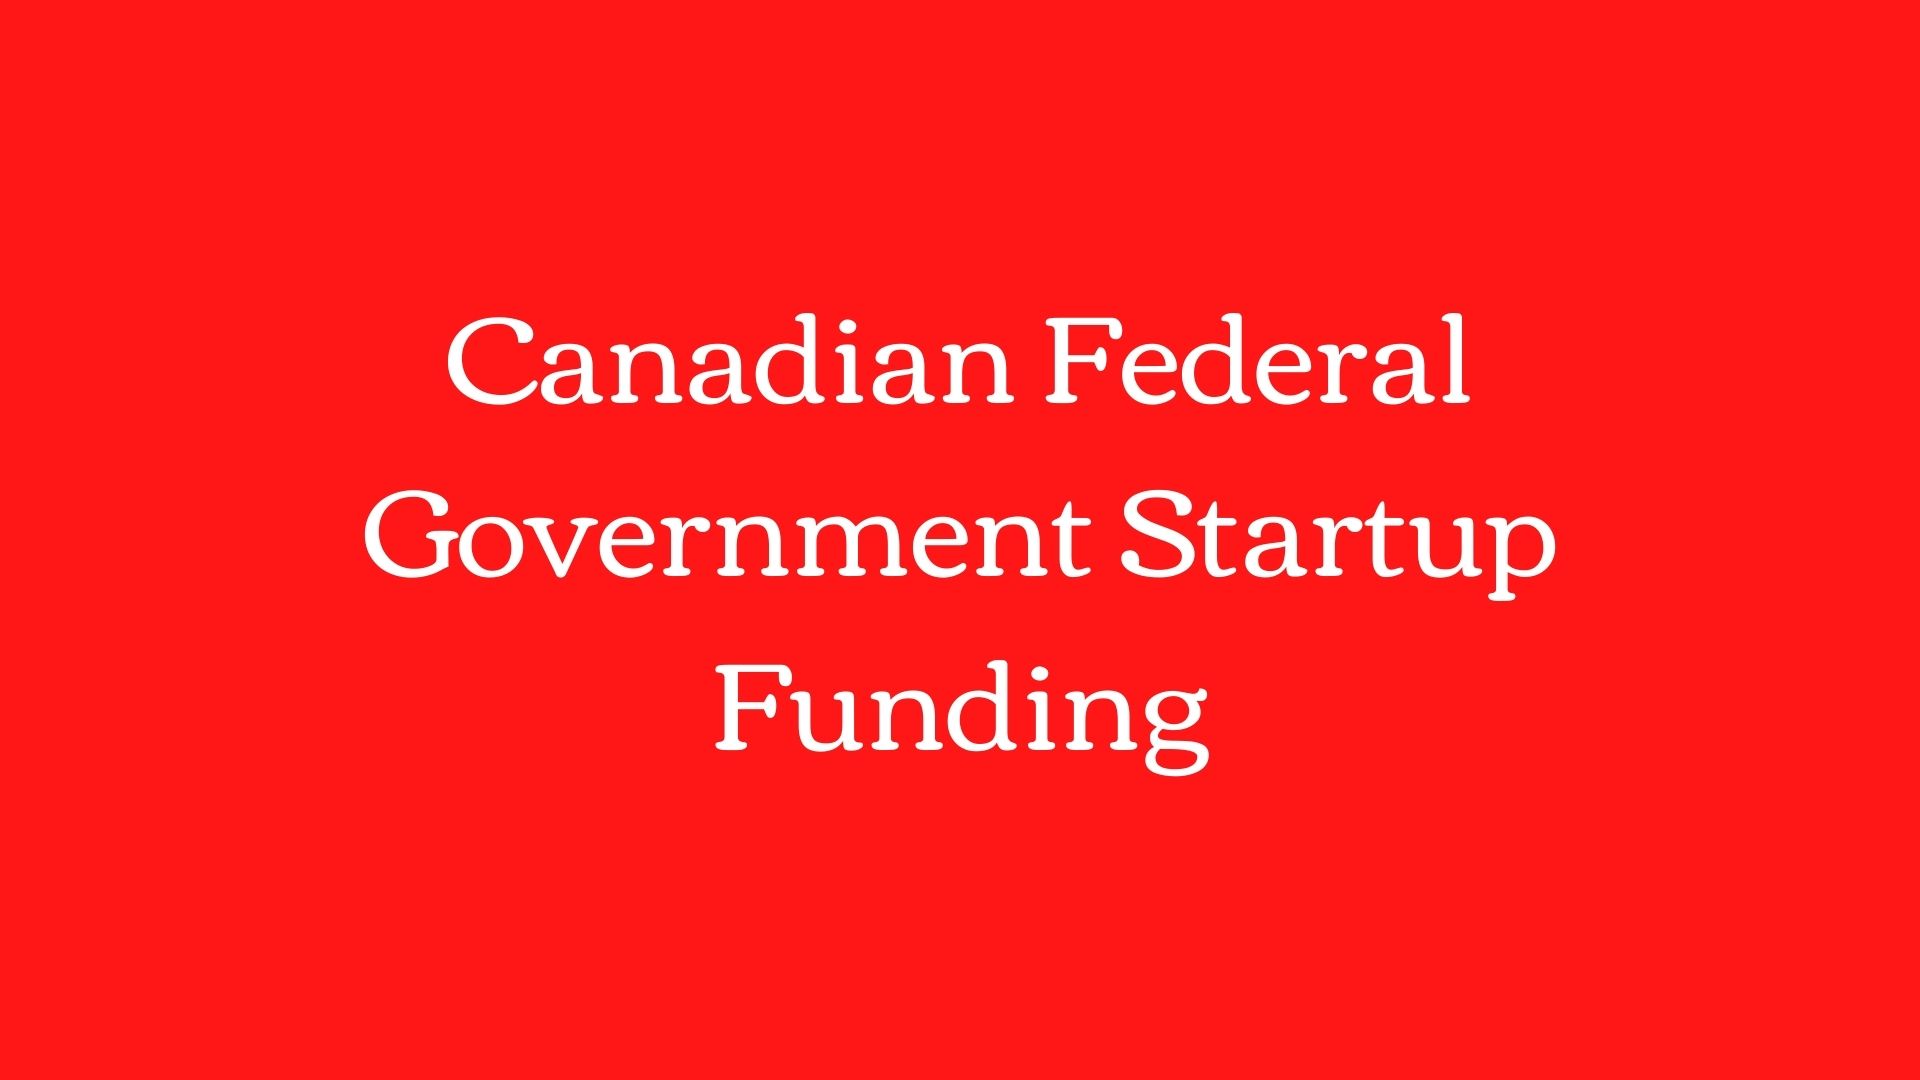 Canadian Federal Government Startup Funding